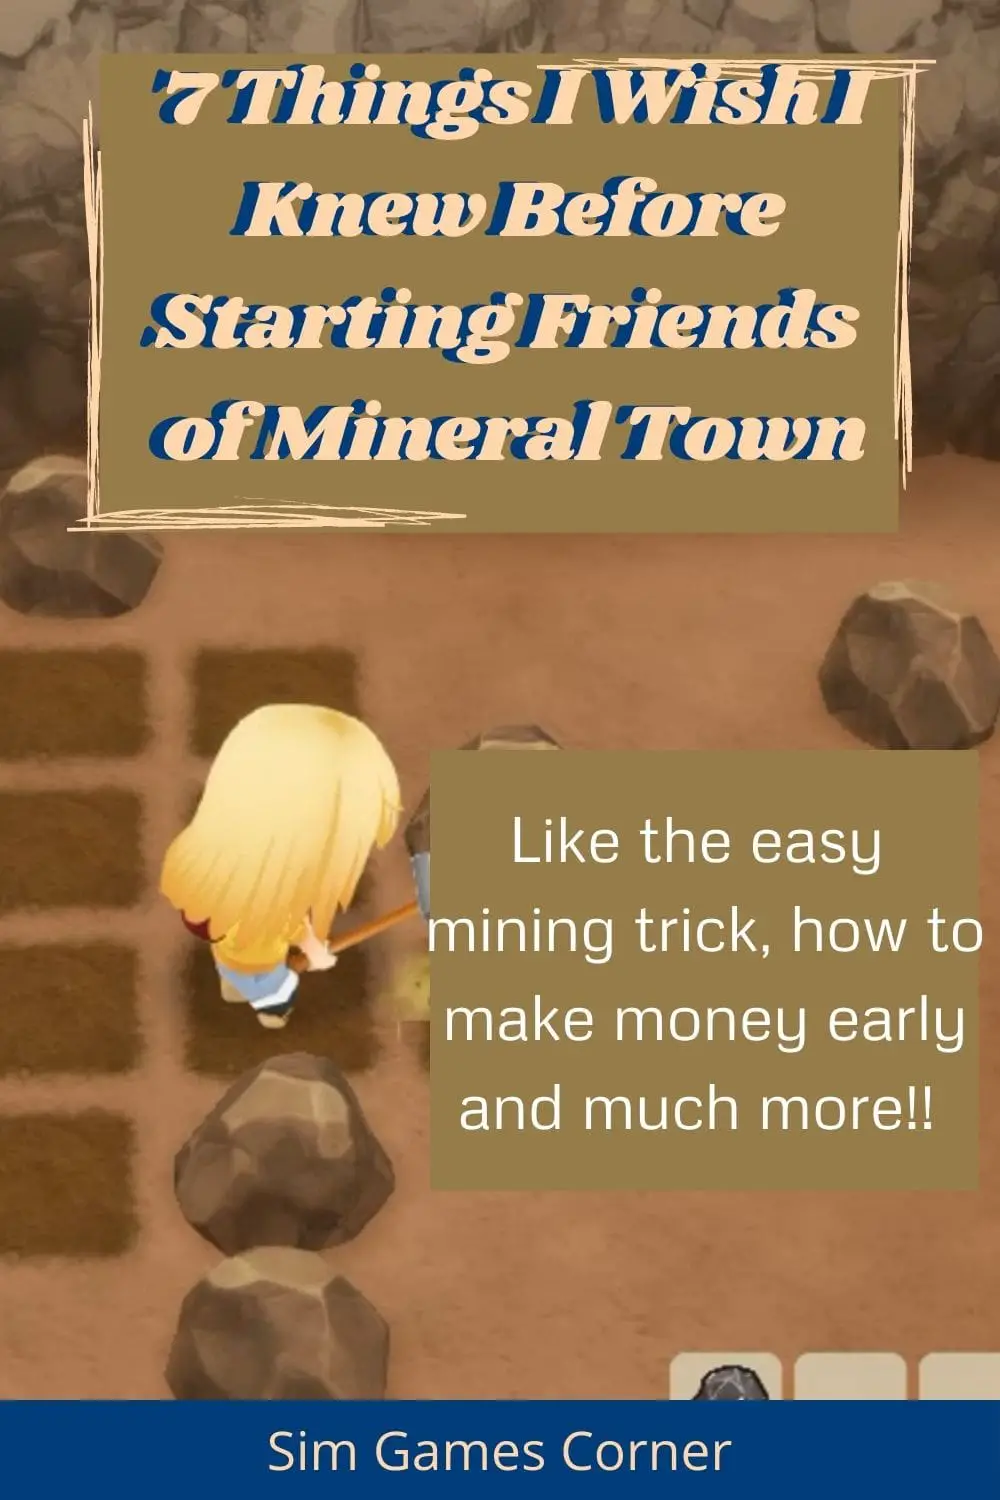 7 Things I Wish I Knew Before Starting Friends of Mineral Town pin